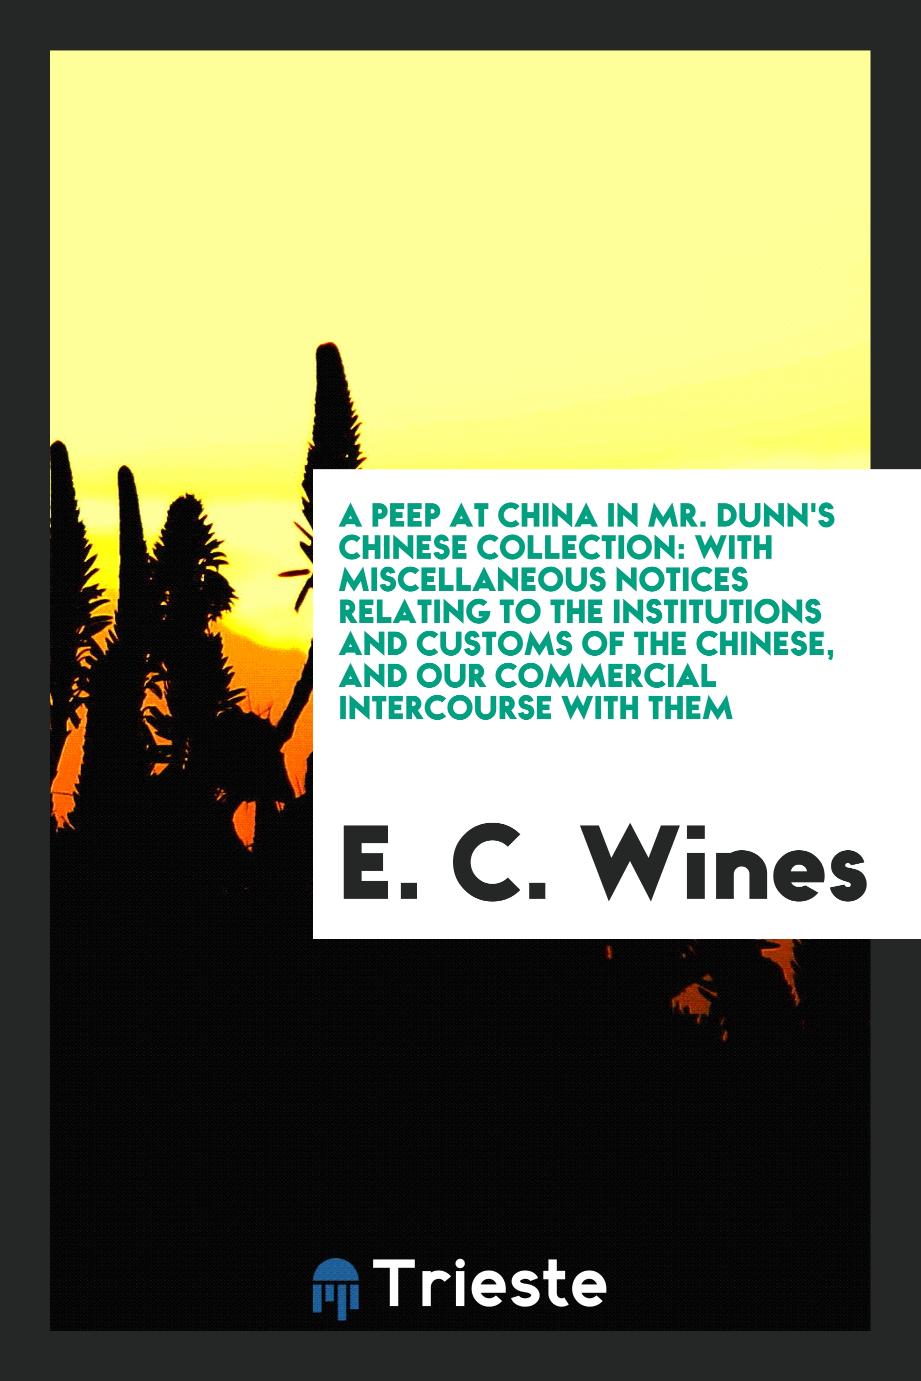 A Peep at China in Mr. Dunn's Chinese Collection: With Miscellaneous Notices Relating to The Institutions And Customs of The Chinese, And Our Commercial Intercourse With Them